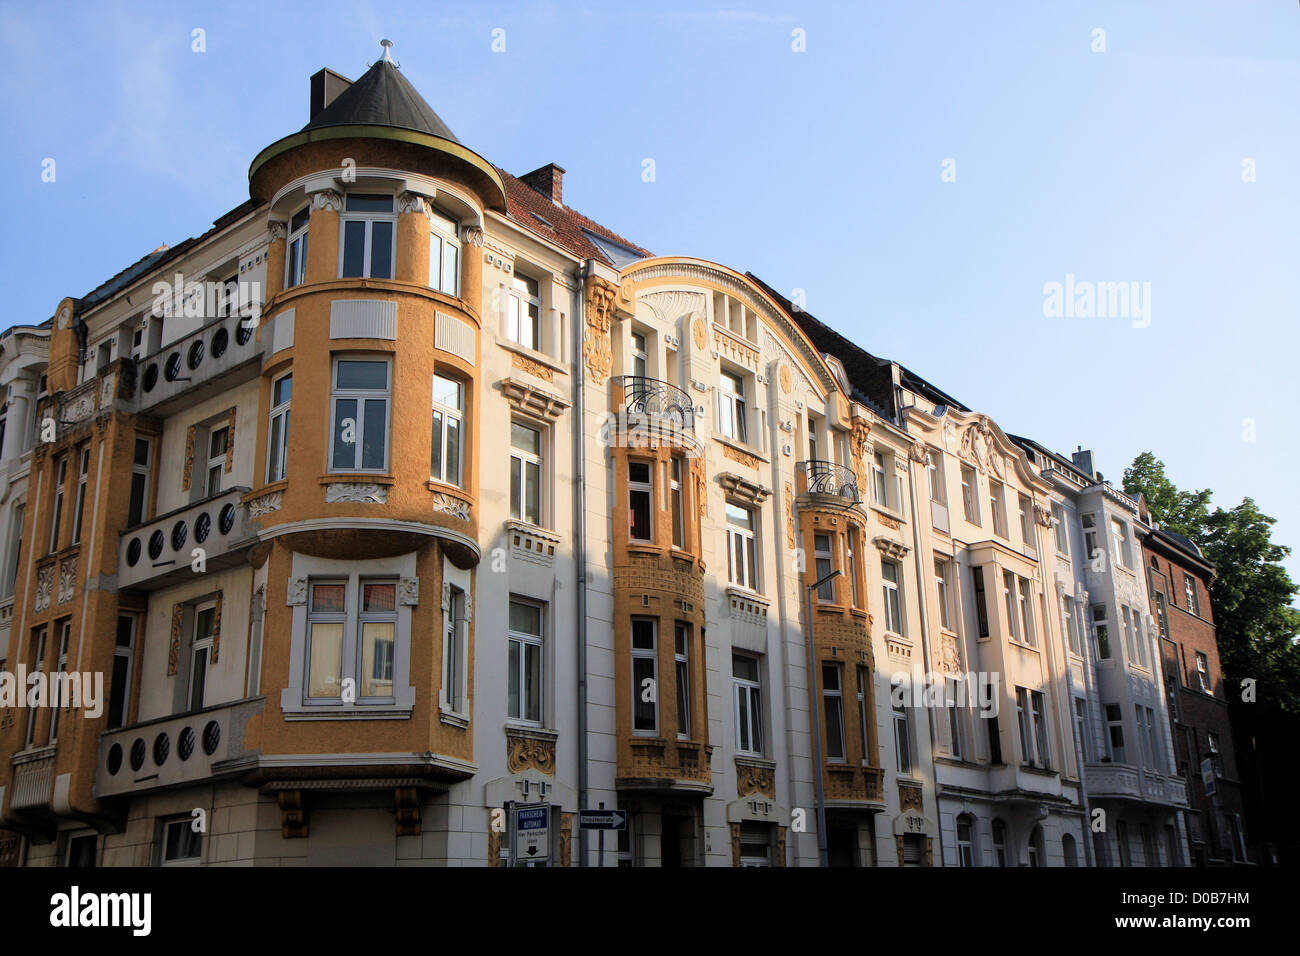 Typical facade, Aachen, Germany, Europe Stock Photo